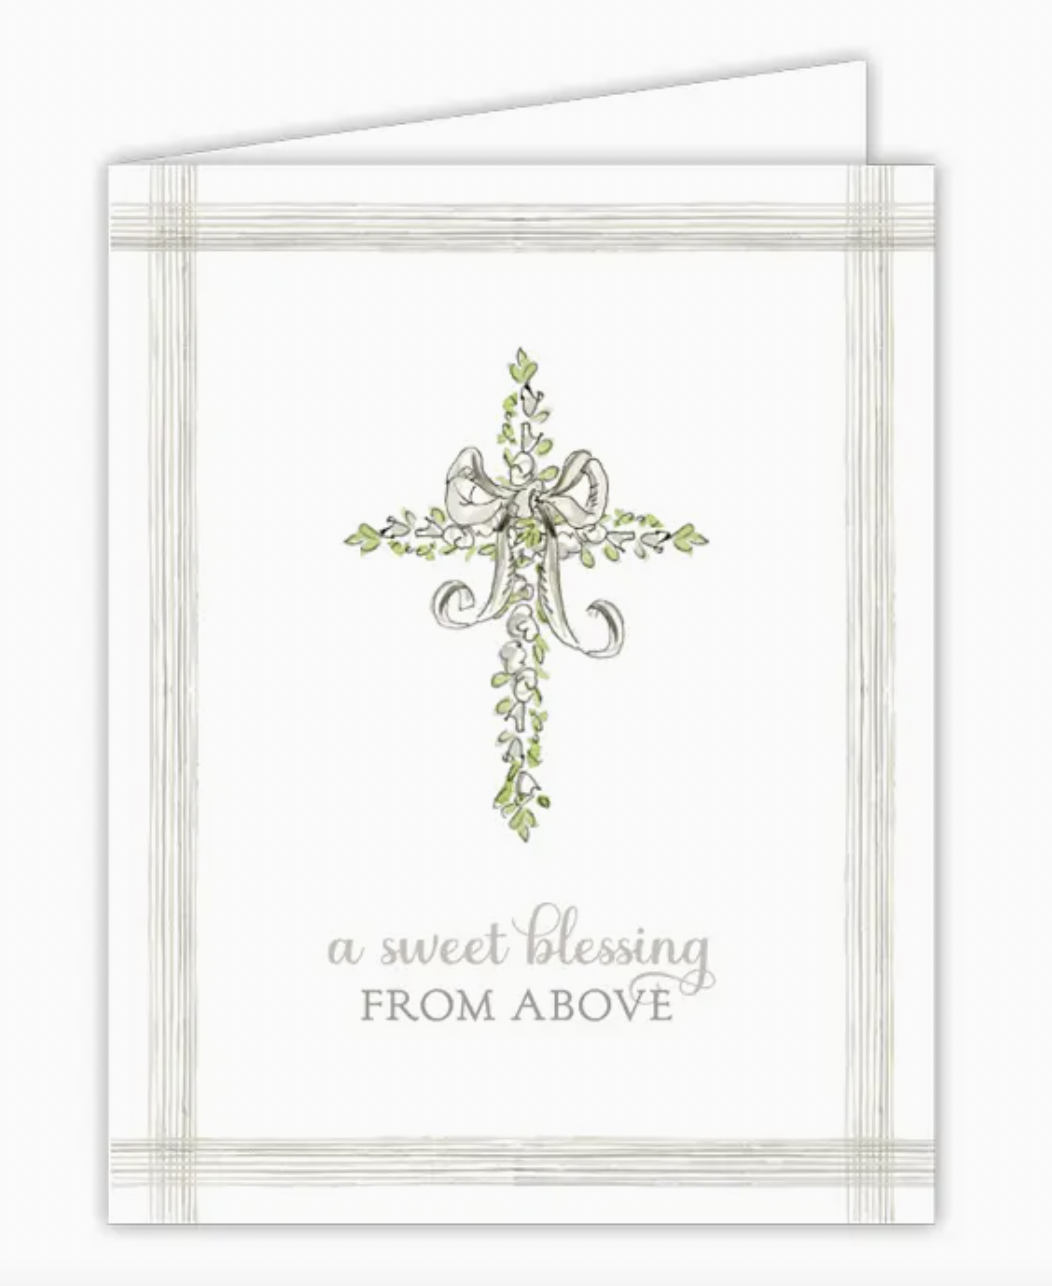 Sweet Blessing from Above Card